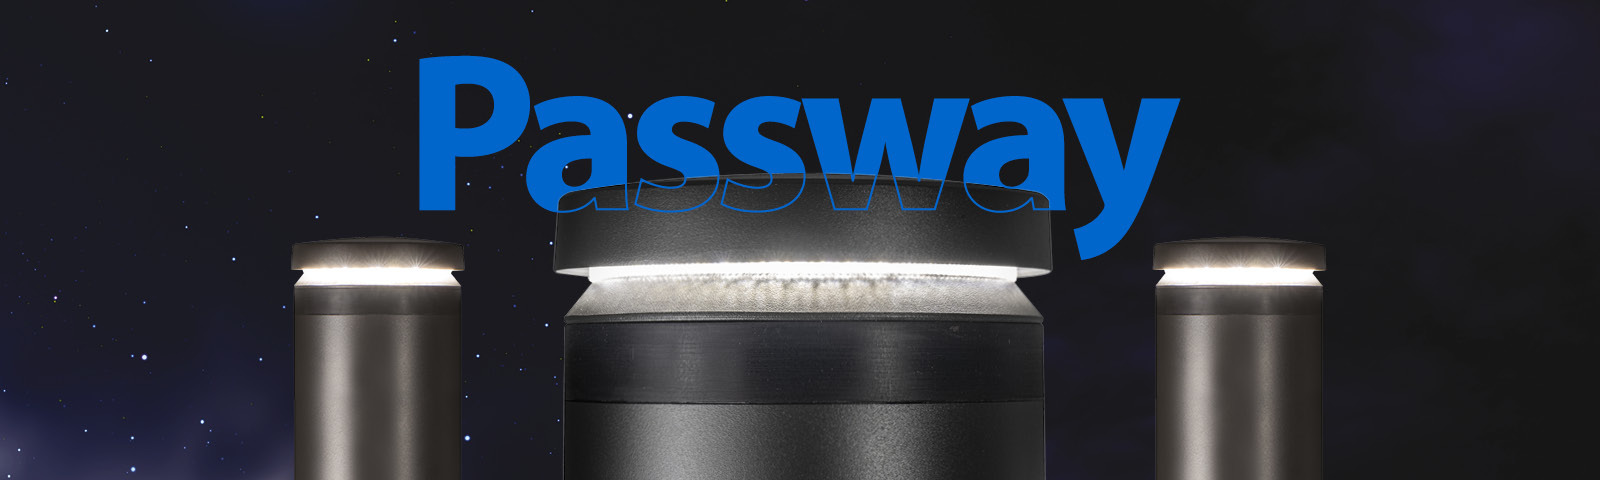 Passway - A Feature Packed State of the Art Lighting Bollard